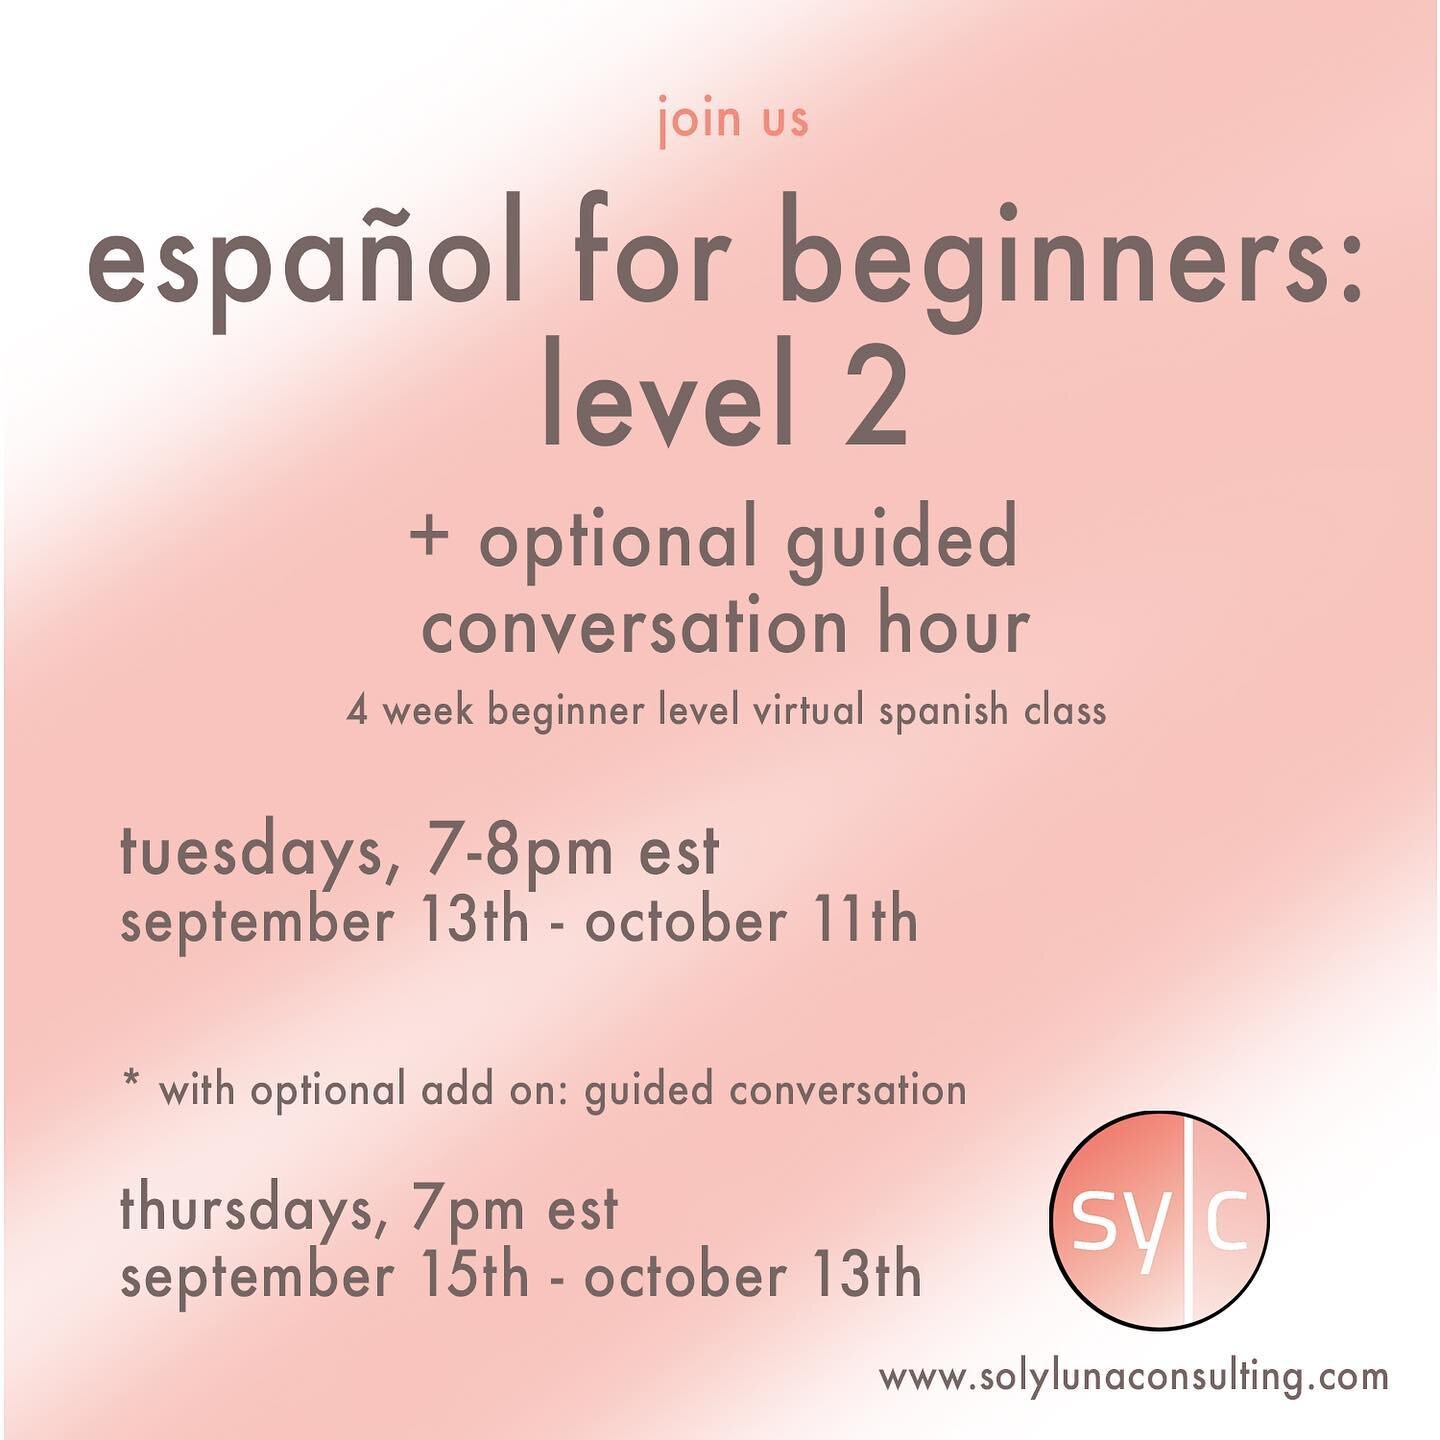 🚨 espa&ntilde;ol for beginners 2 🚨 

registration is LIVE at the link in our bio! 

this level is not just for folks who took the first level, it&rsquo;s for anyone who has a base knowledge and would like to keep learning and improving! 

plus we h